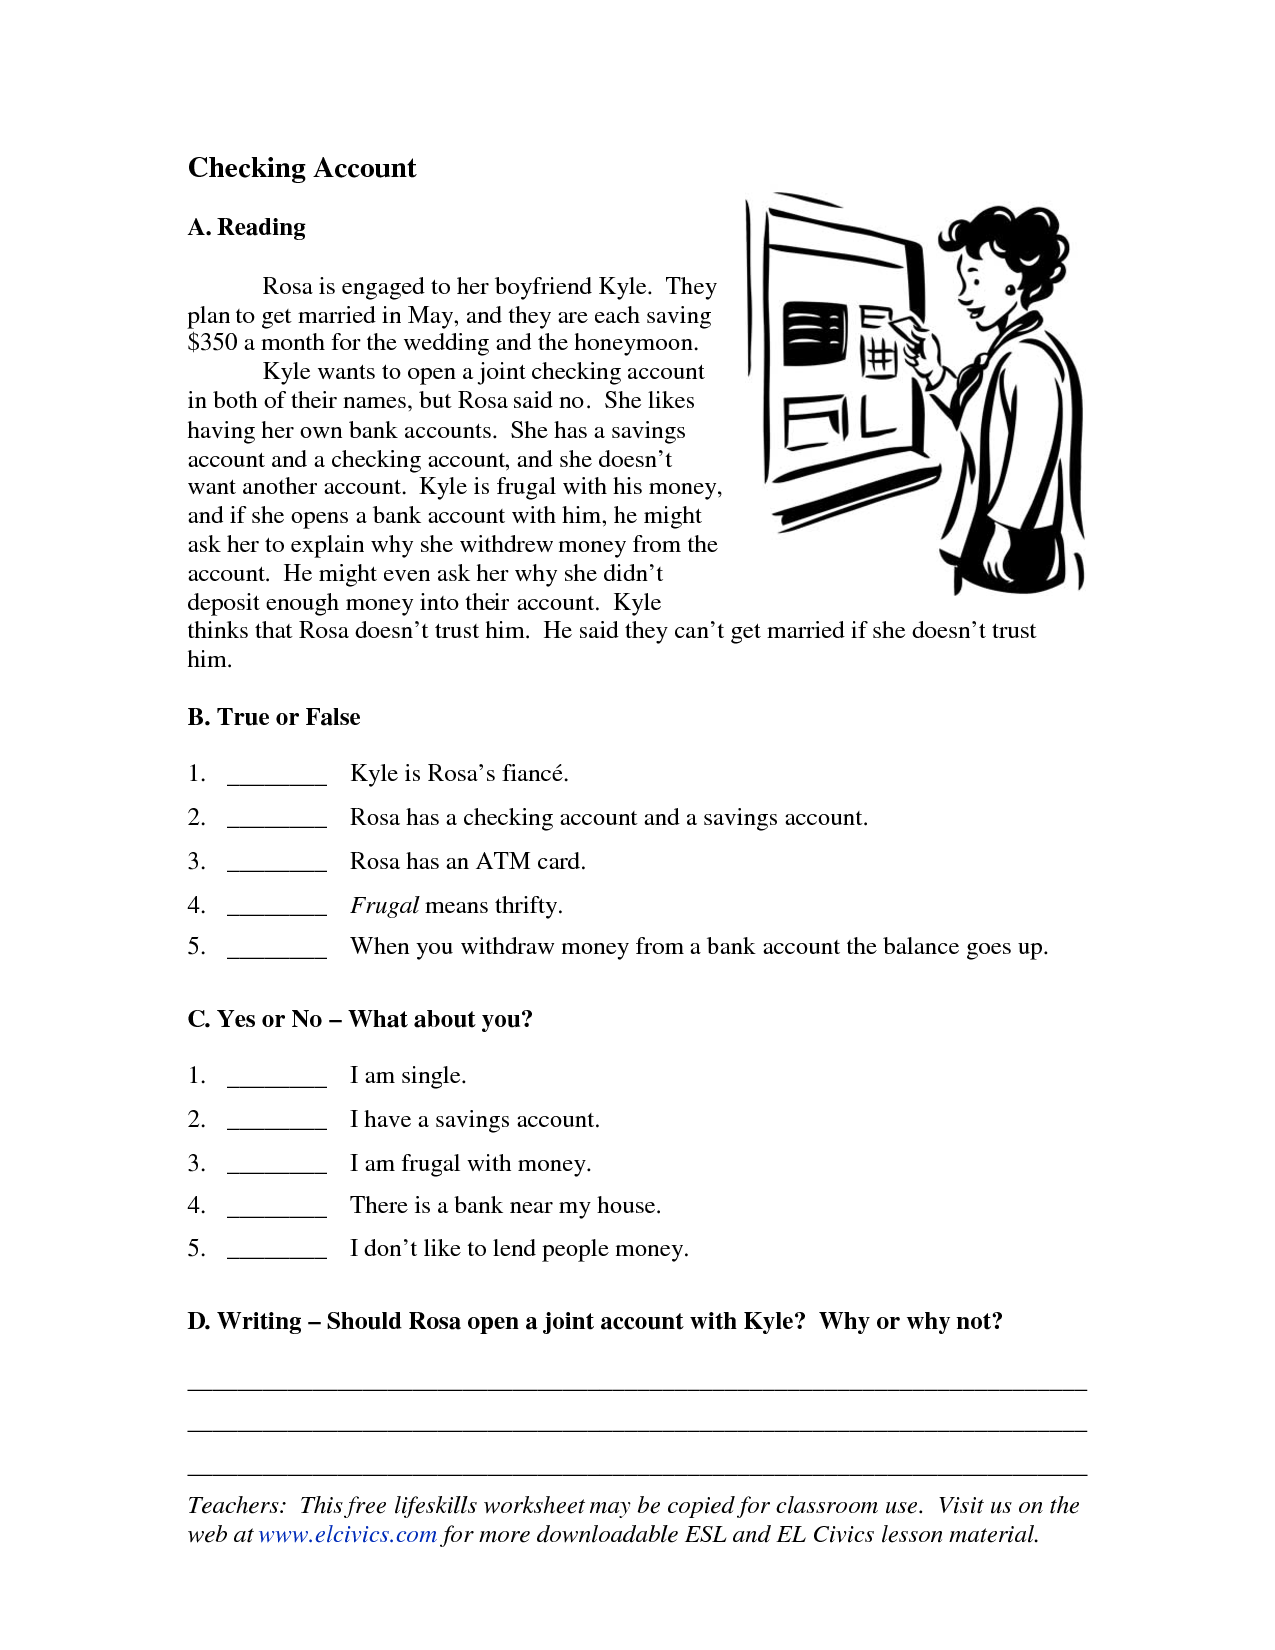 12 Best Images of Money Worksheets For ESL Adults - English Money